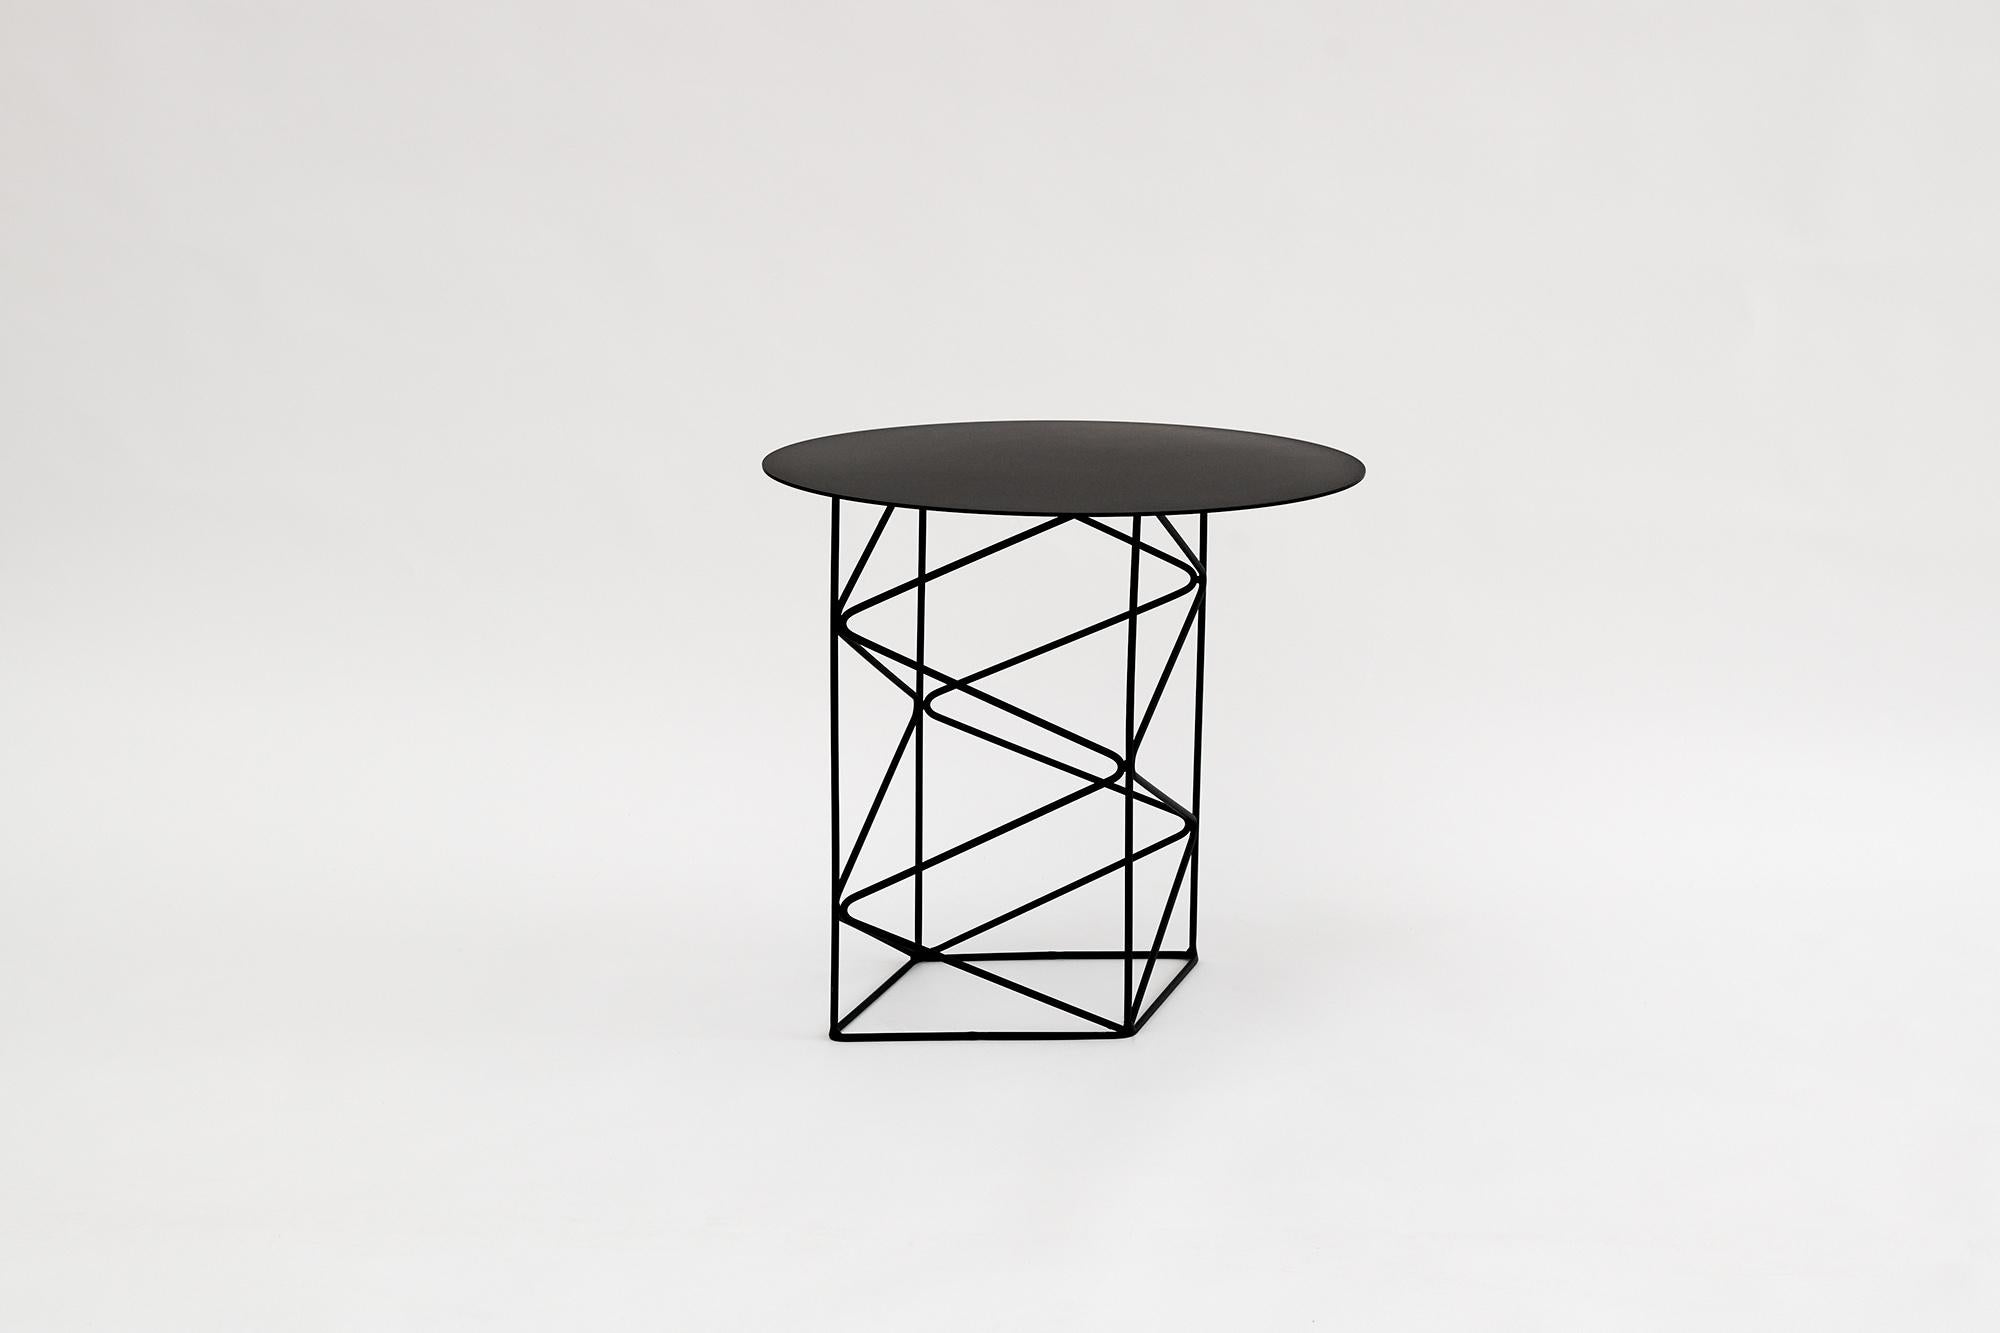 Inos Side Table, Geometric, Modern, Welded Steel / Powder-Coat Pale White In New Condition For Sale In Broadmeadows, Victoria